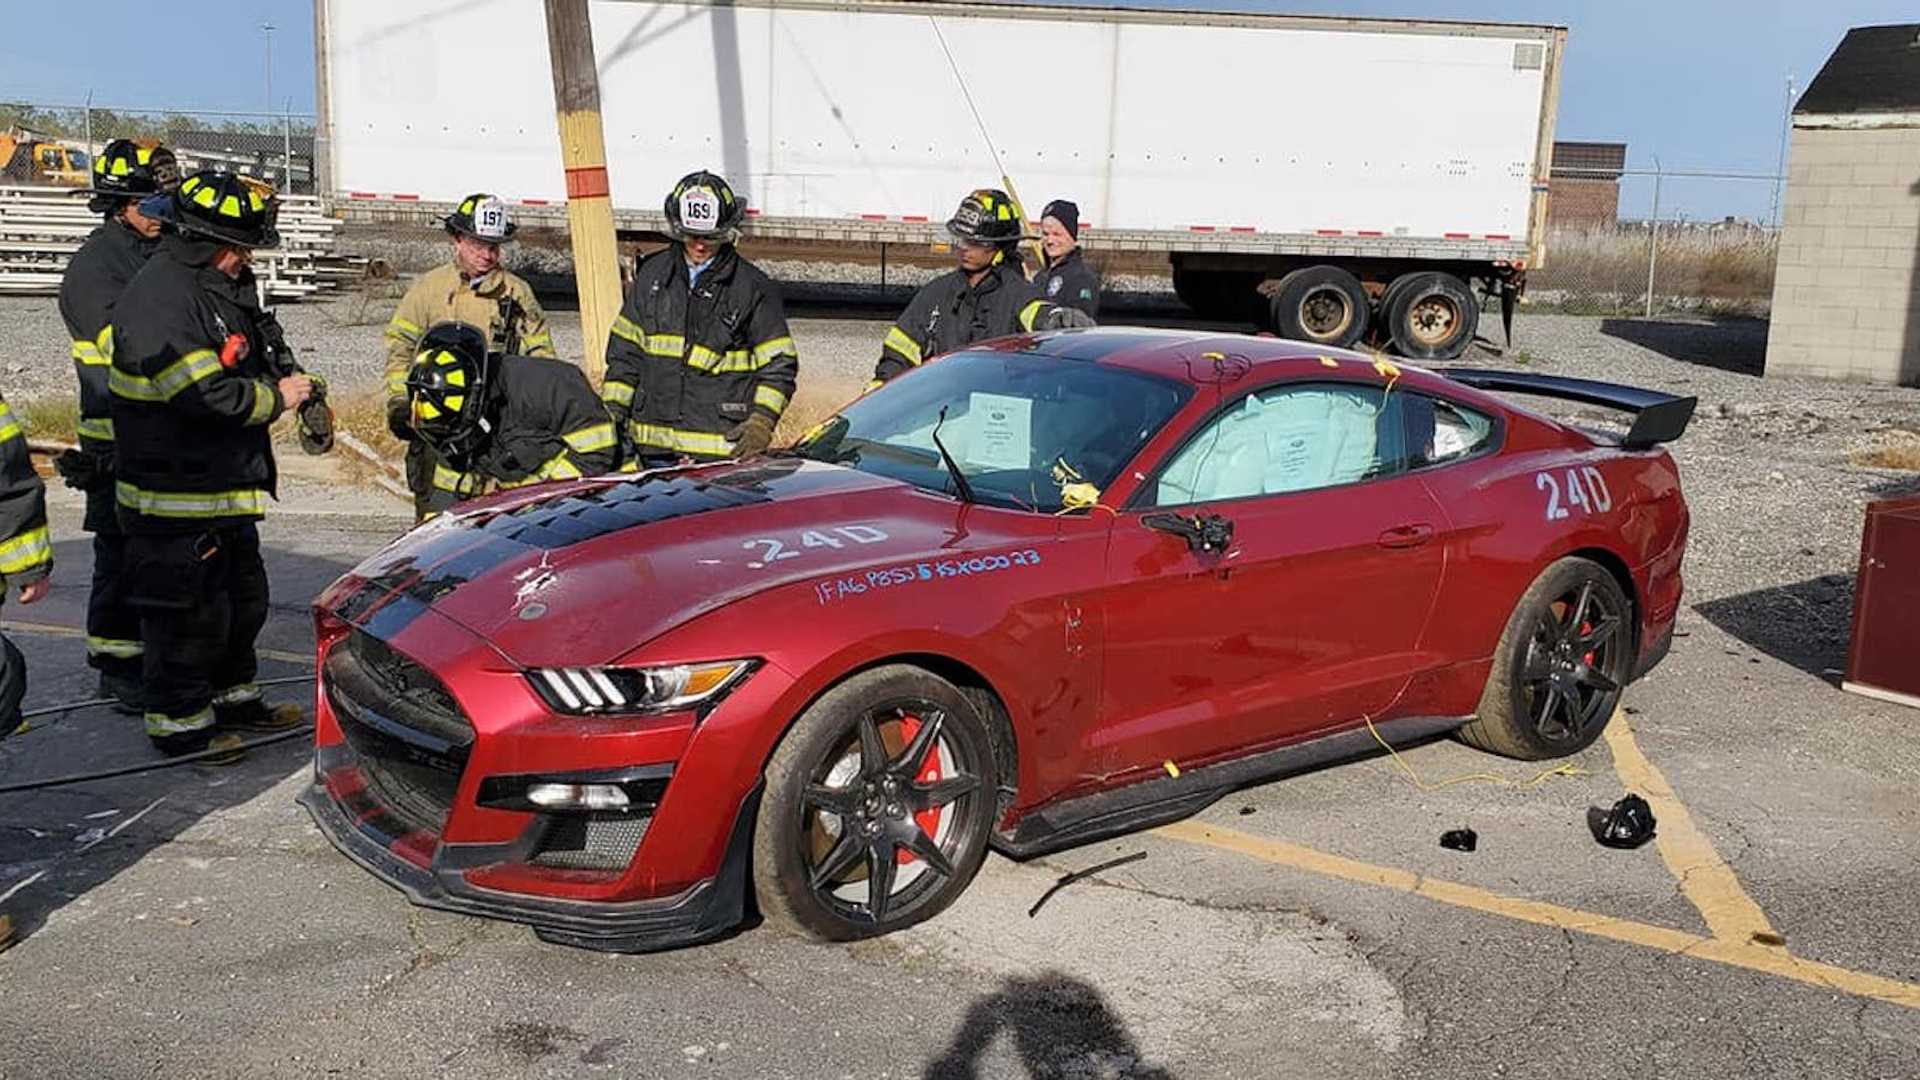 Fire Department 2020 destroys Ford Shelby GT500 for training purposes